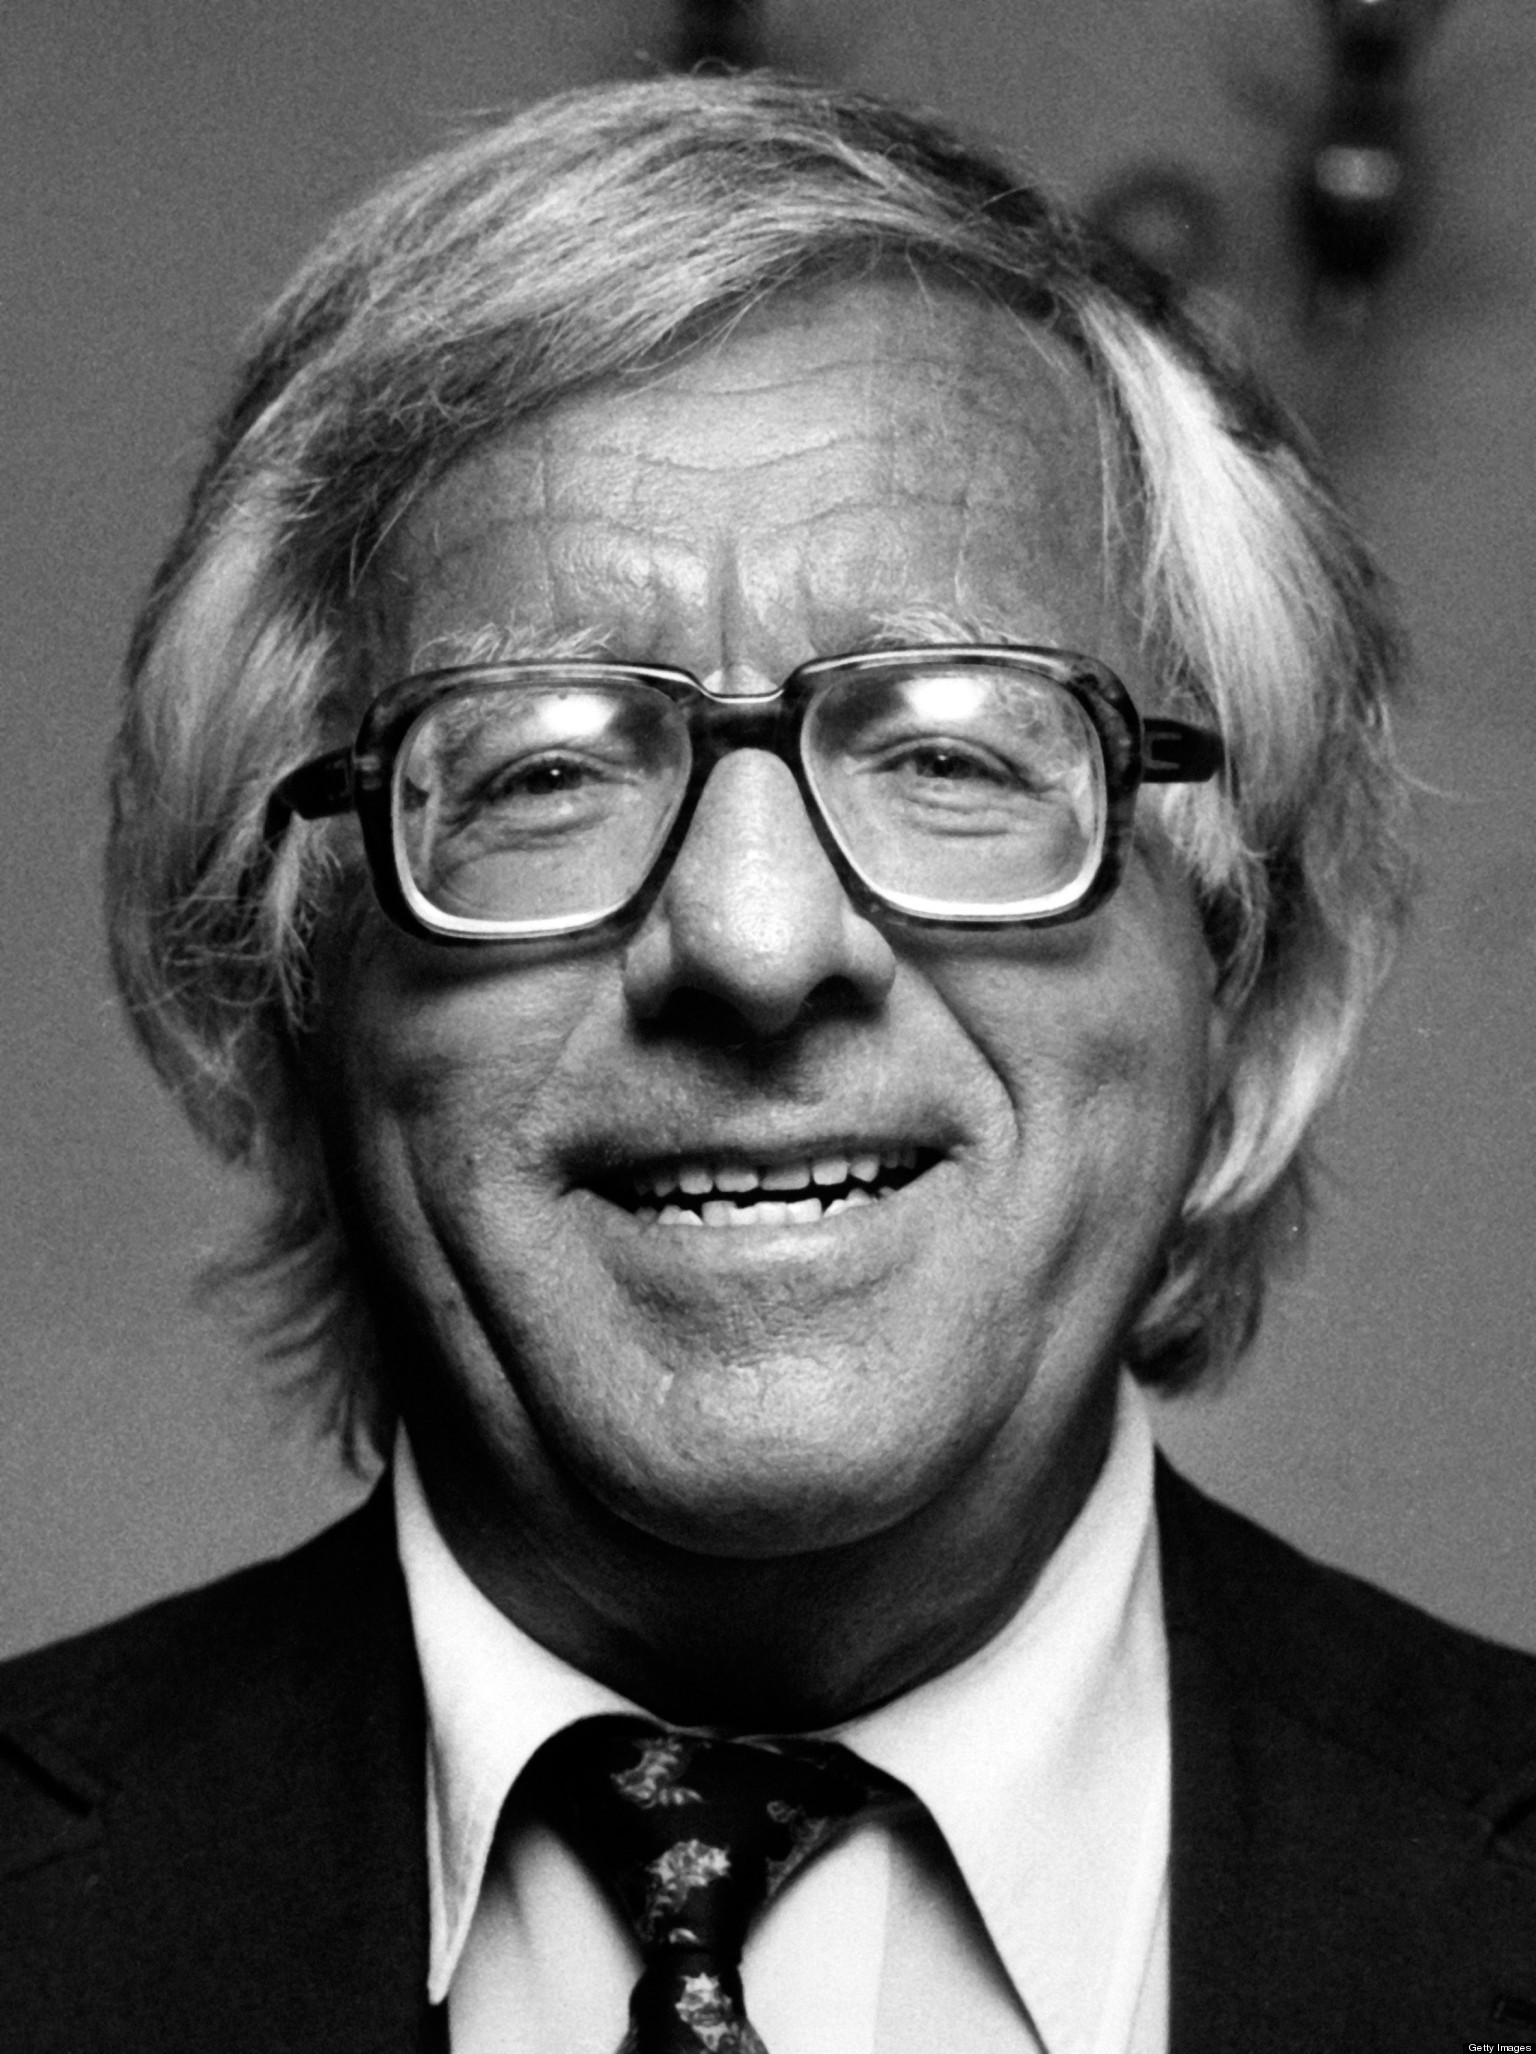 Author Ray Bradbury attends Nineth Annual Hemingway Contest on March 10, 1986 at Harry's Bar and Grill in Century City, California.